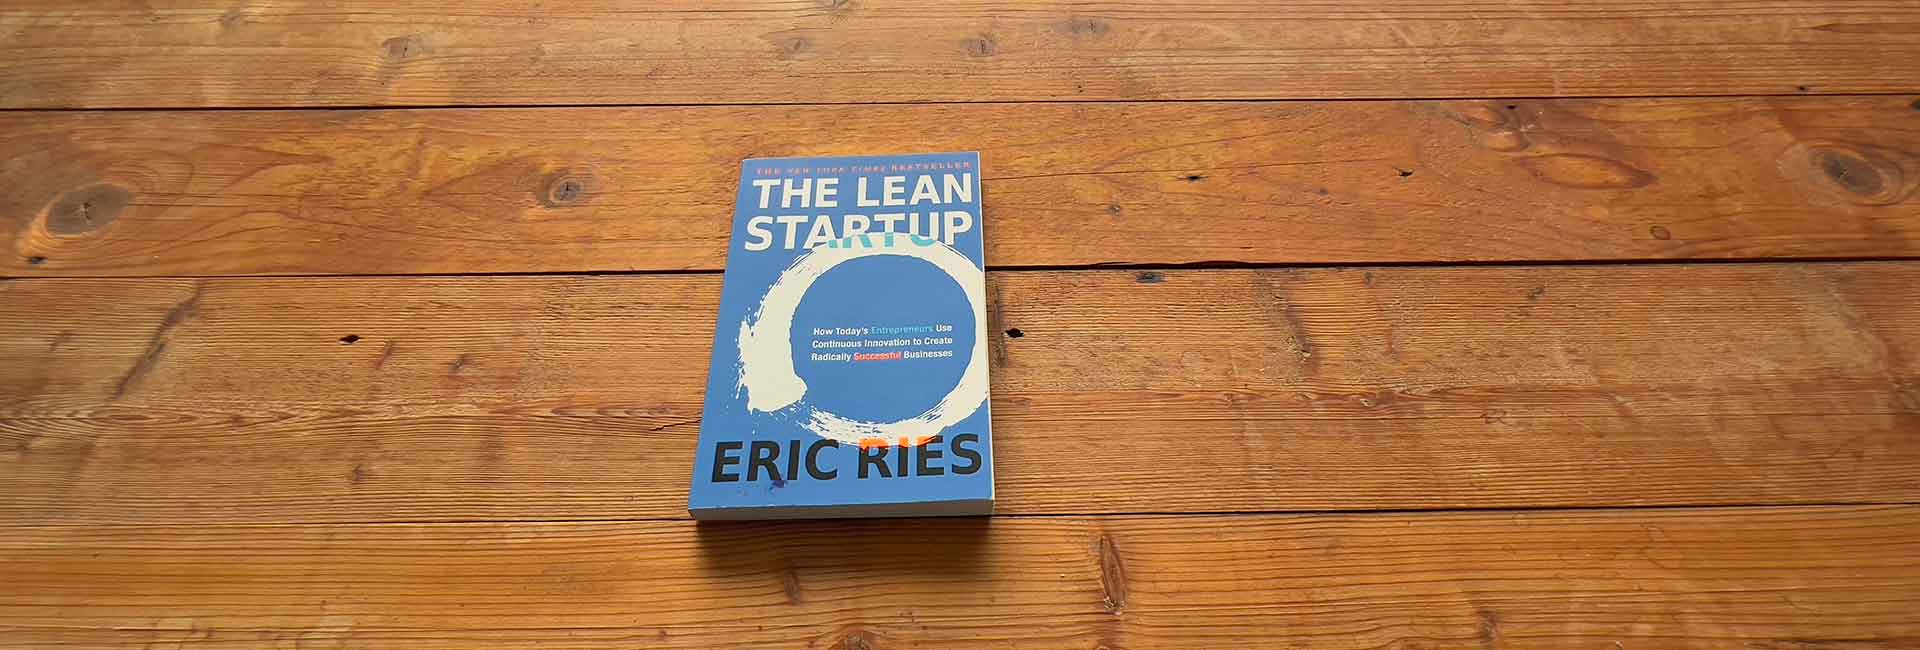 SBC S THE LEAN STARTUP